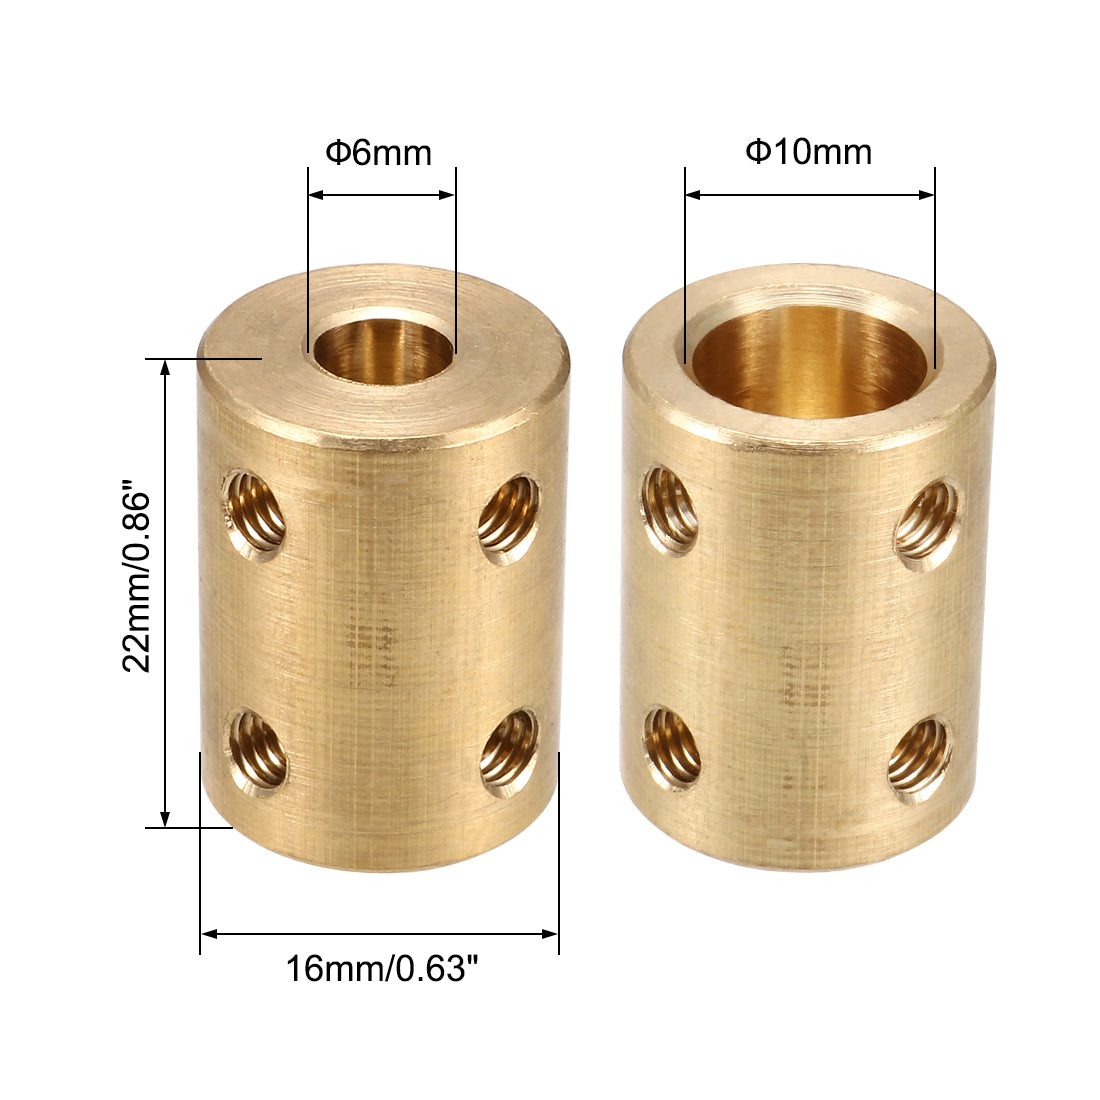 uxcell Uxcell 6mm to 10mm Bore Rigid Coupling 22mm Length 16mm Diameter DIY Coupler Connector